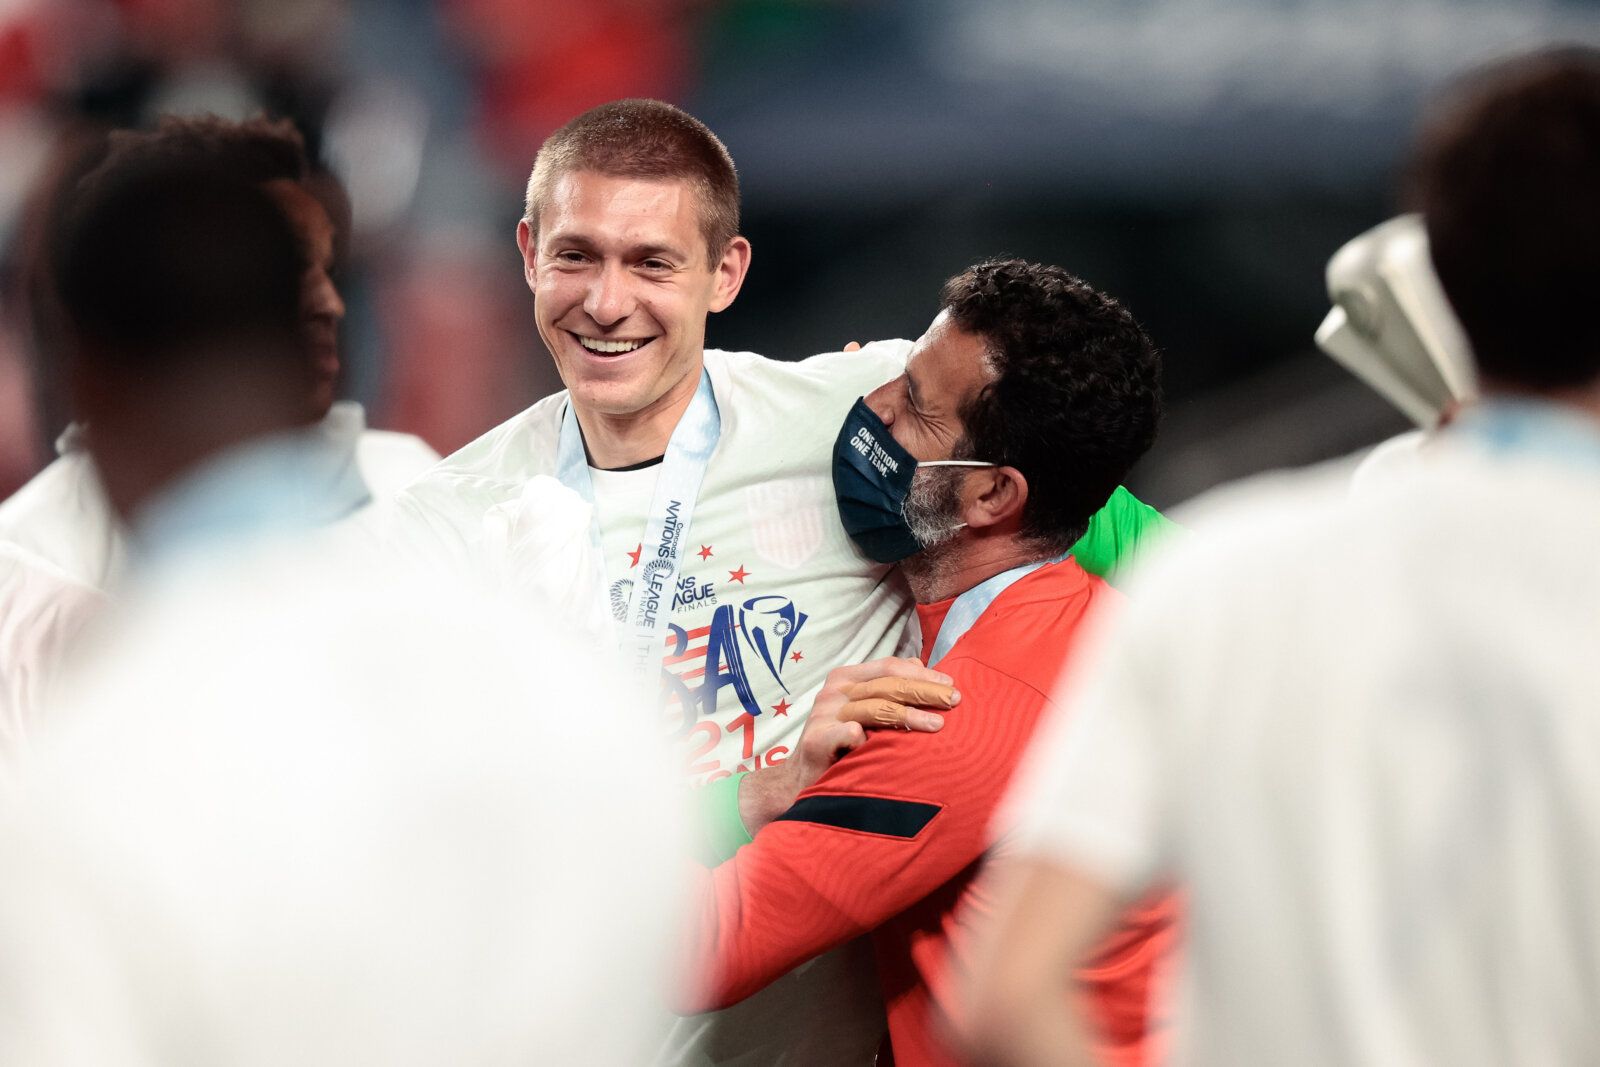 Jun 6, 2021; Denver, Colorado, USA; United States goalkeeper Ethan Horvath (12) celebrates after defeating Mexico in the 2021 CONCACAF Nations League Finals soccer series final match at Empower Field at Mile High. Mandatory Credit: Isaiah J. Downing-USA TODAY Sports